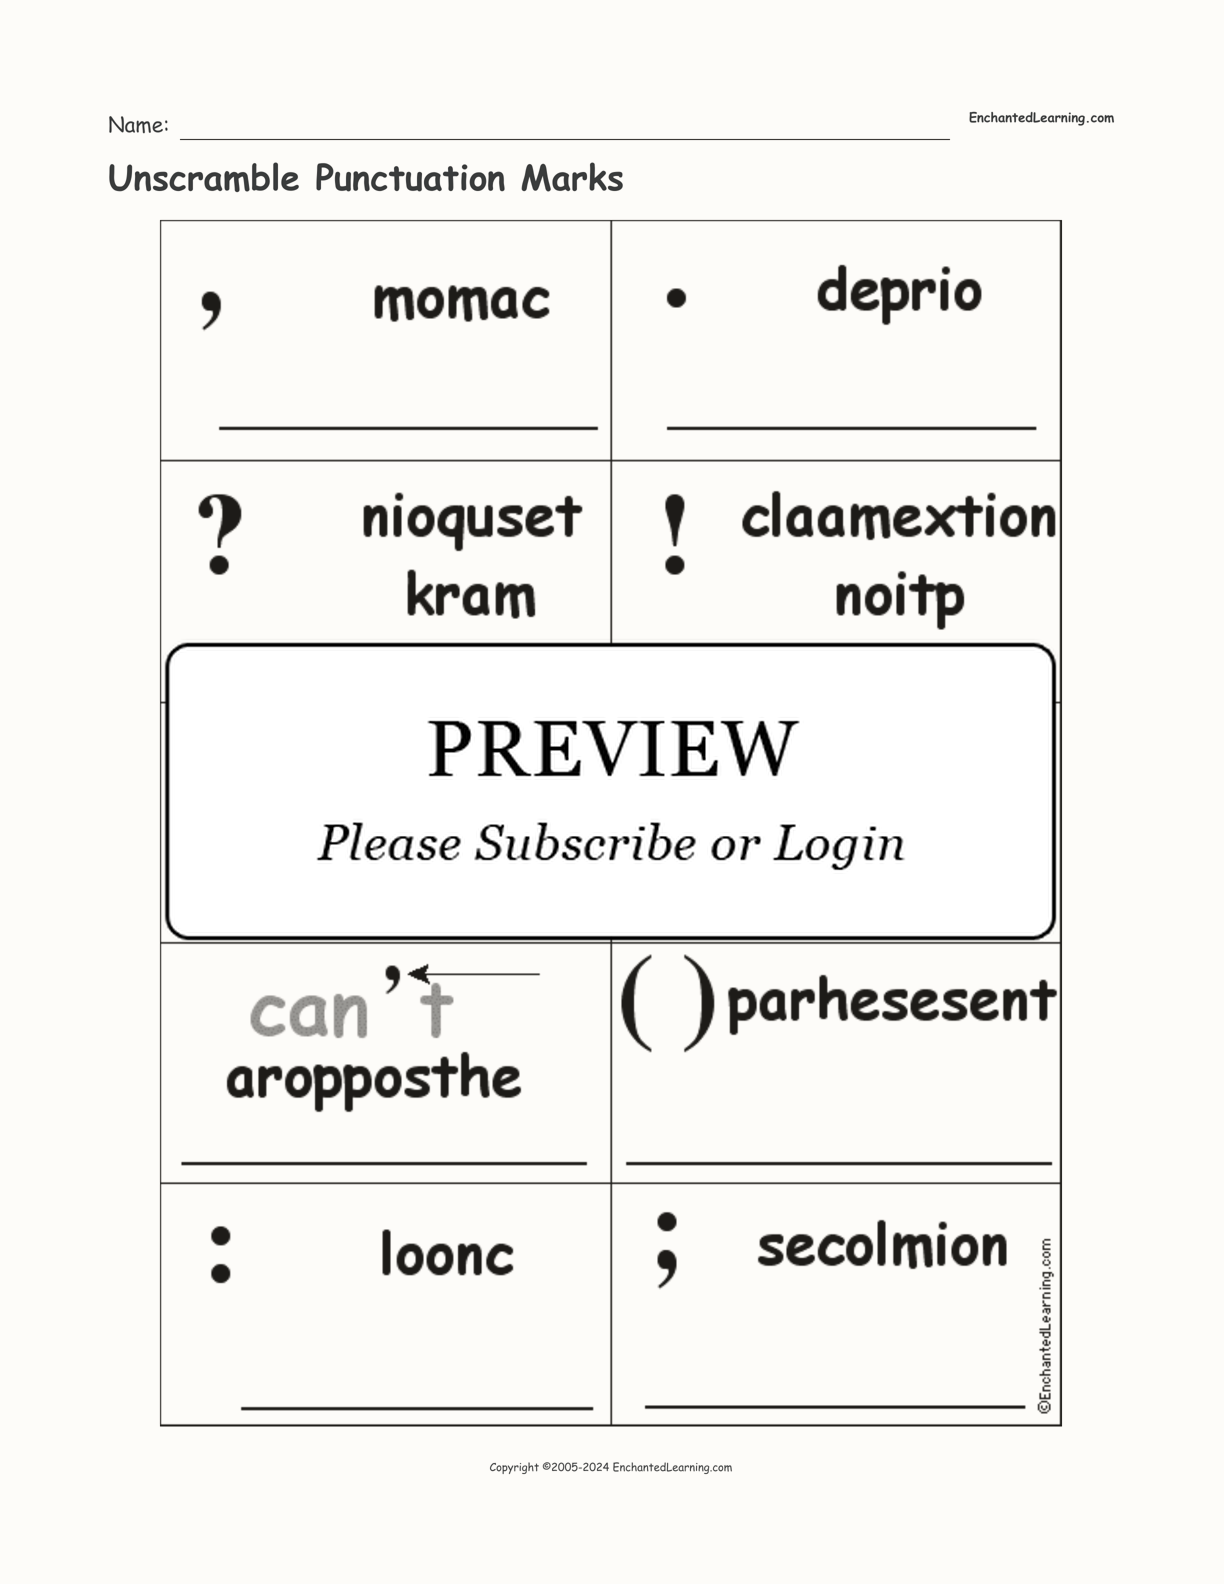 Unscramble Punctuation Marks interactive worksheet page 1